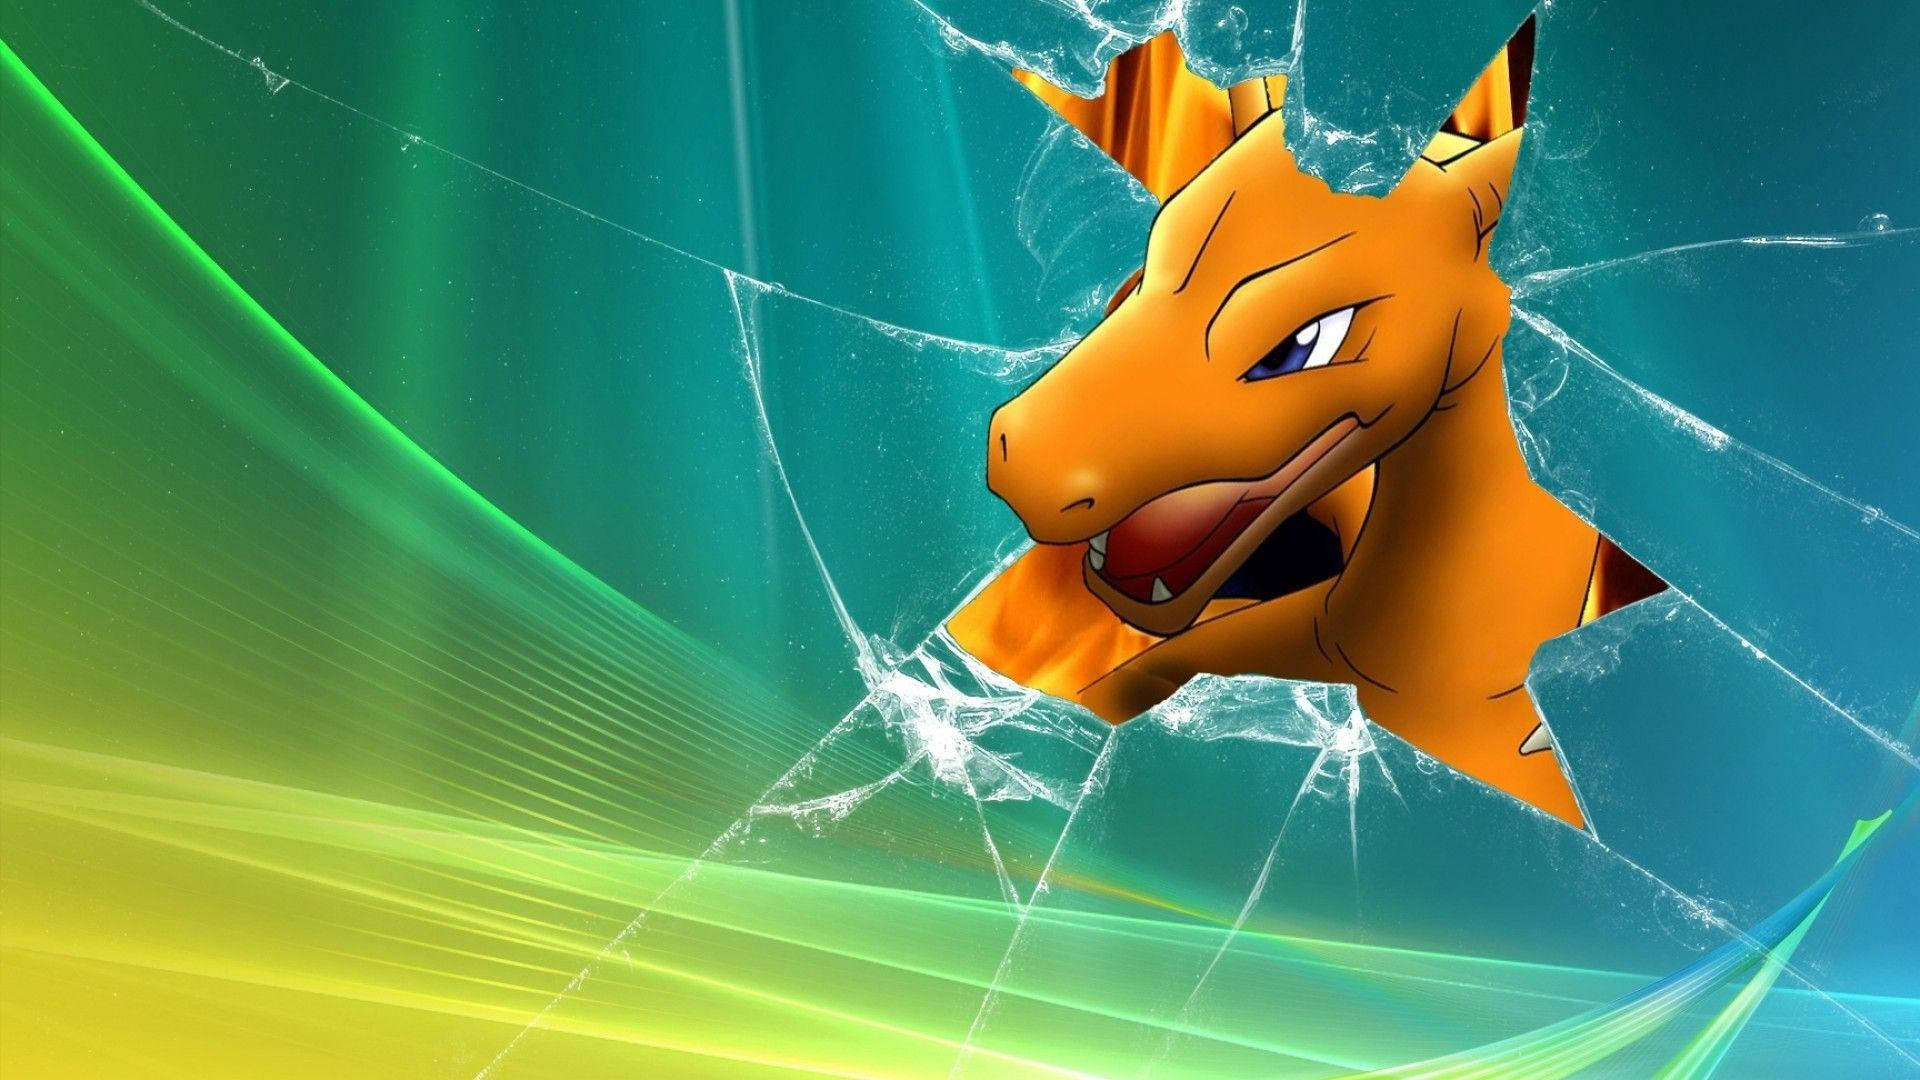 Free Charizard Wallpaper Downloads, [100+] Charizard Wallpapers for FREE |  